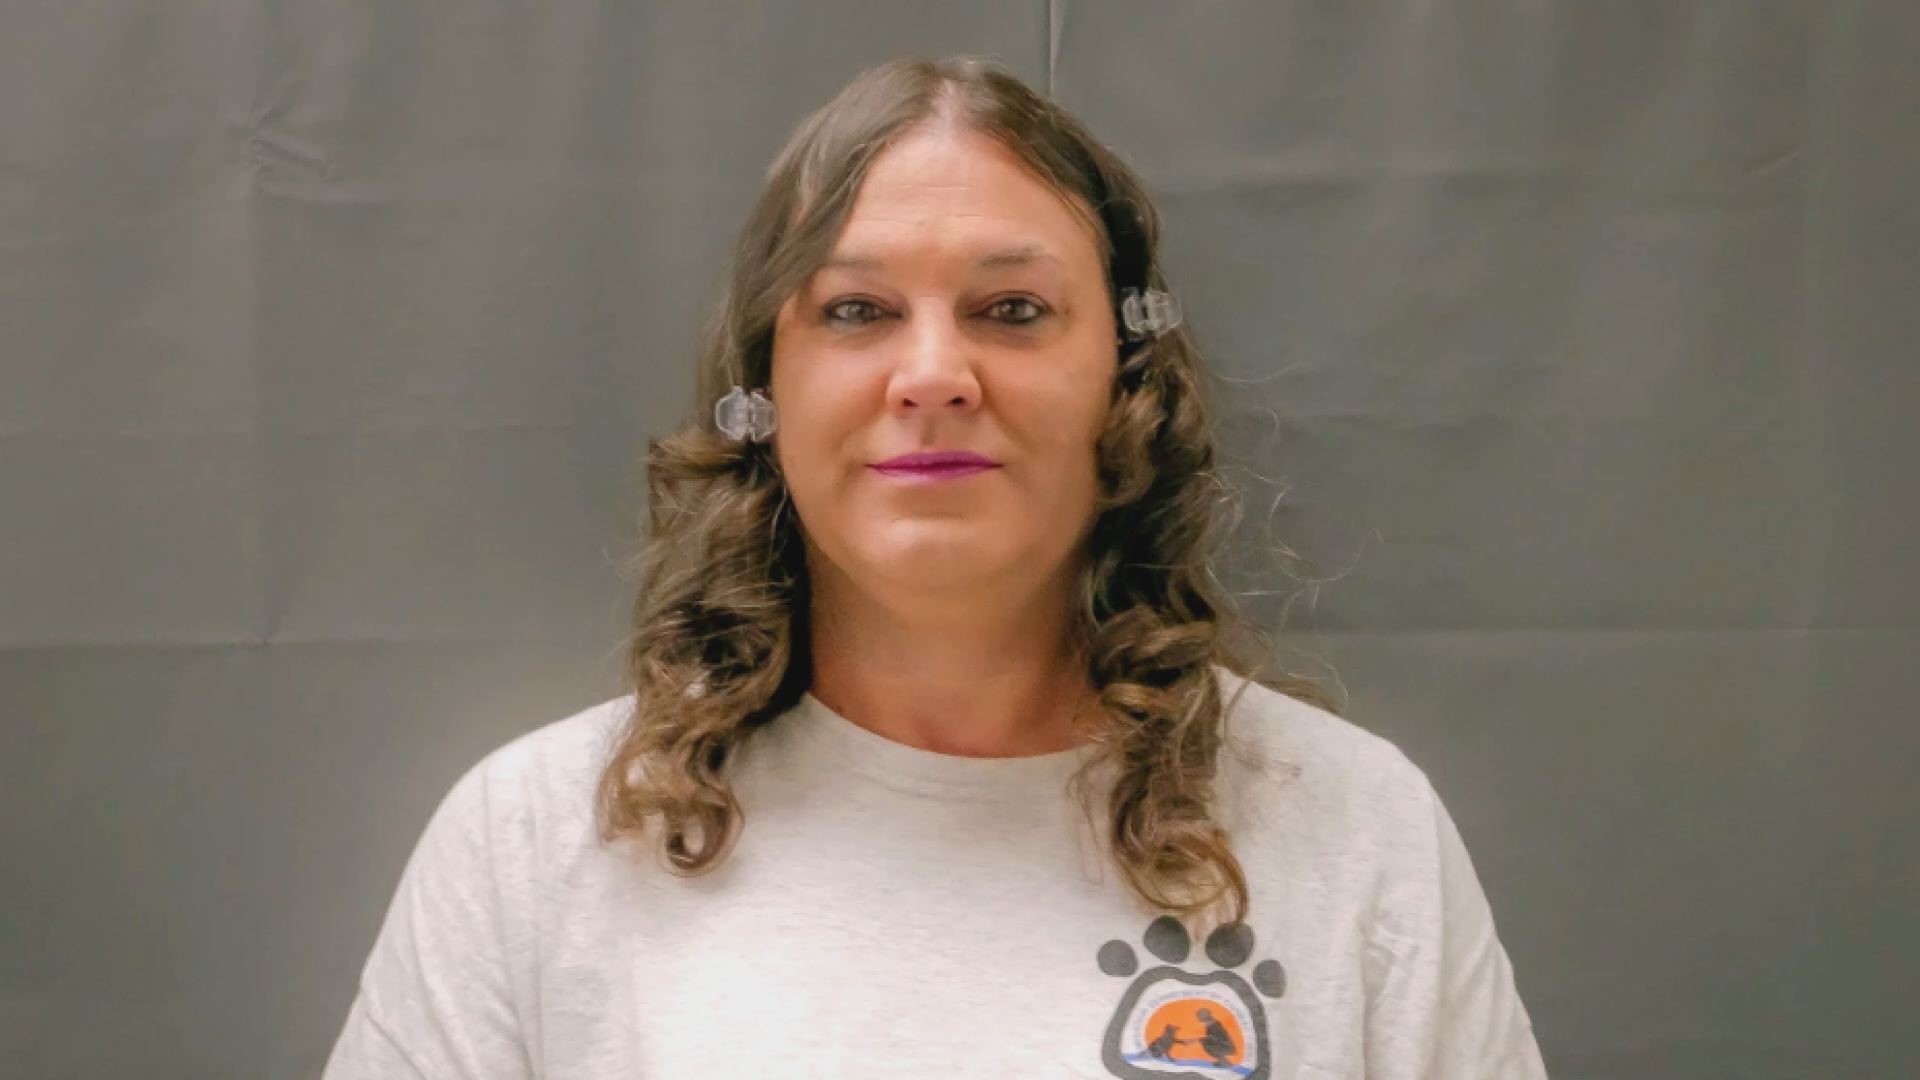 Amber McLaughlin, the first openly transgender woman set to be executed in the United States, is getting baptized three weeks prior to her scheduled execution date.